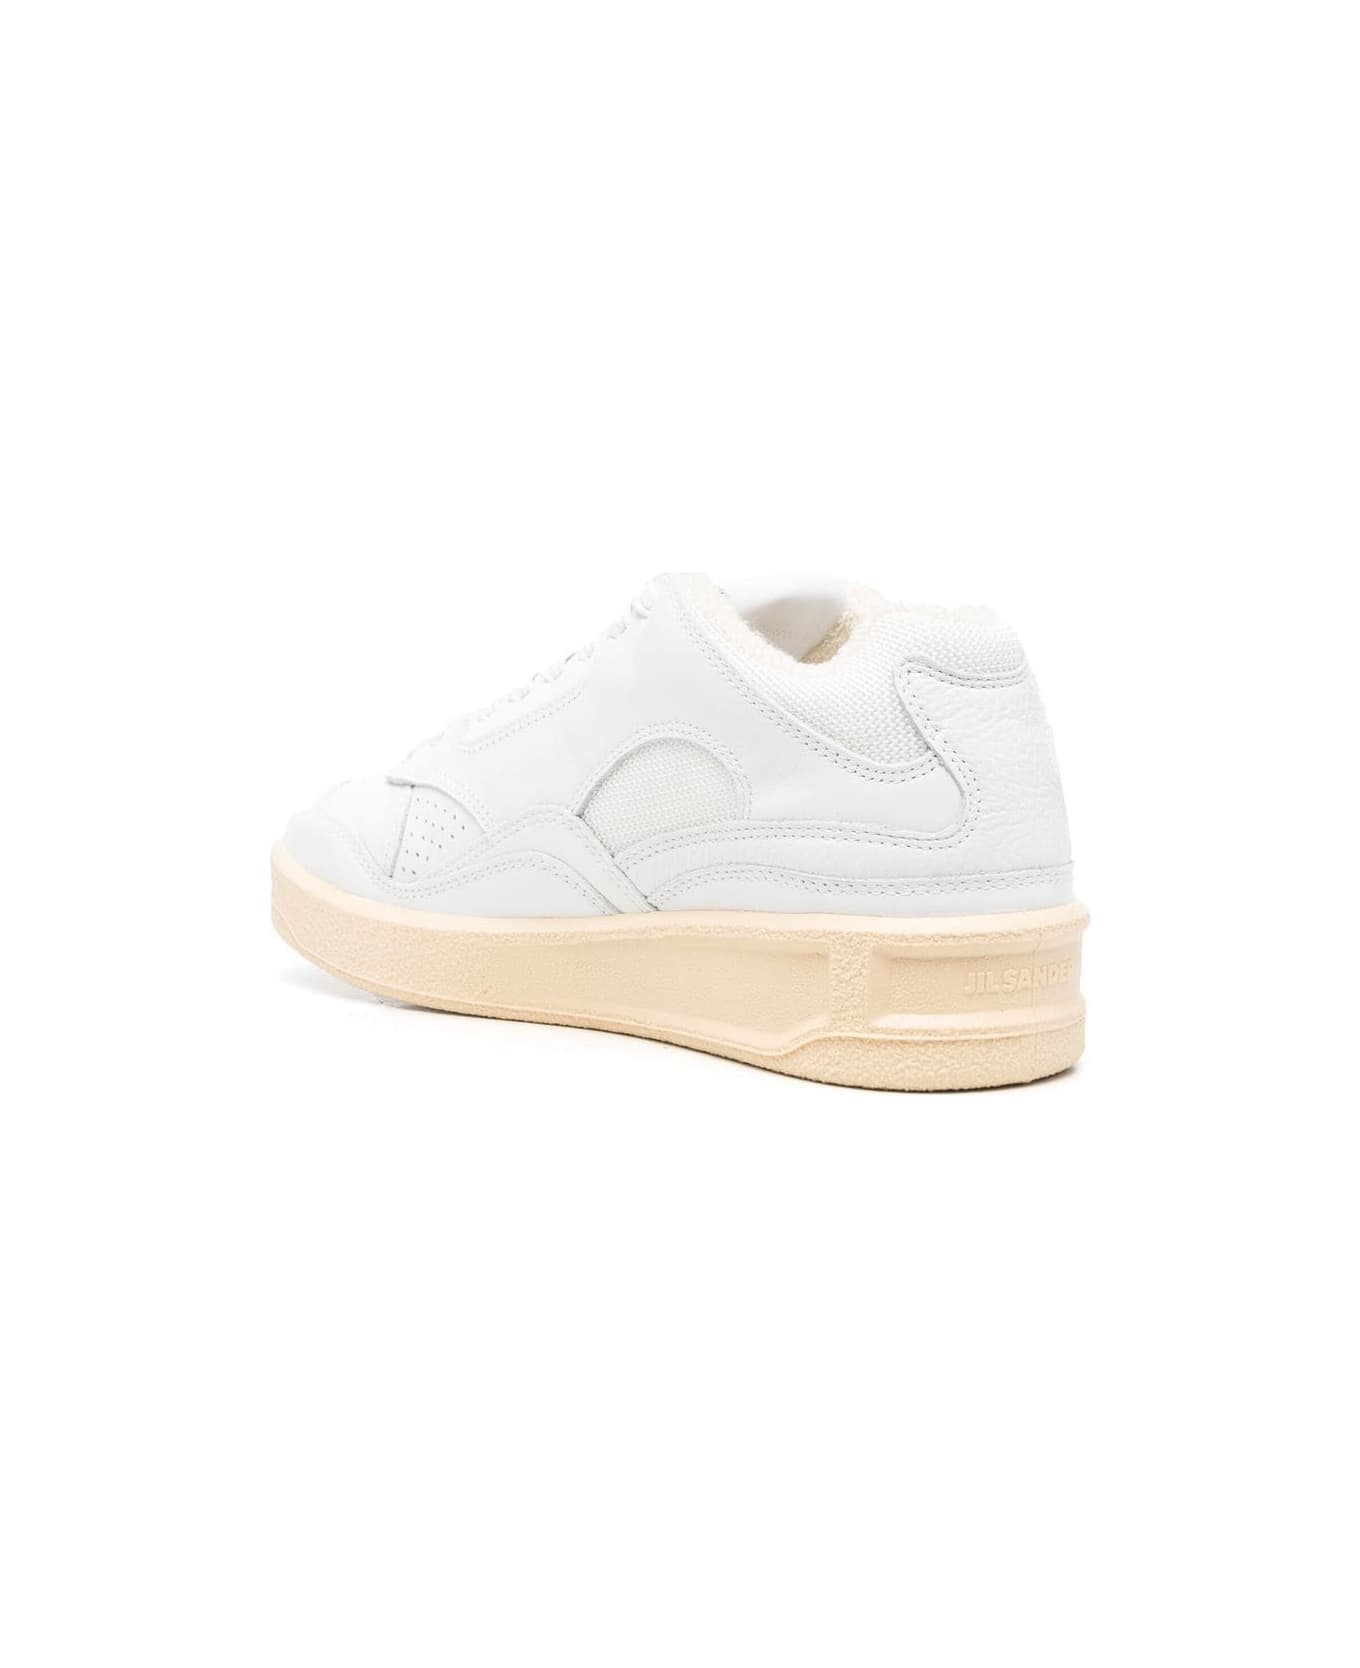 Jil Sander Cow Leather And Fabric Mesh Mid Cut Sneakers - White Ecru スニーカー